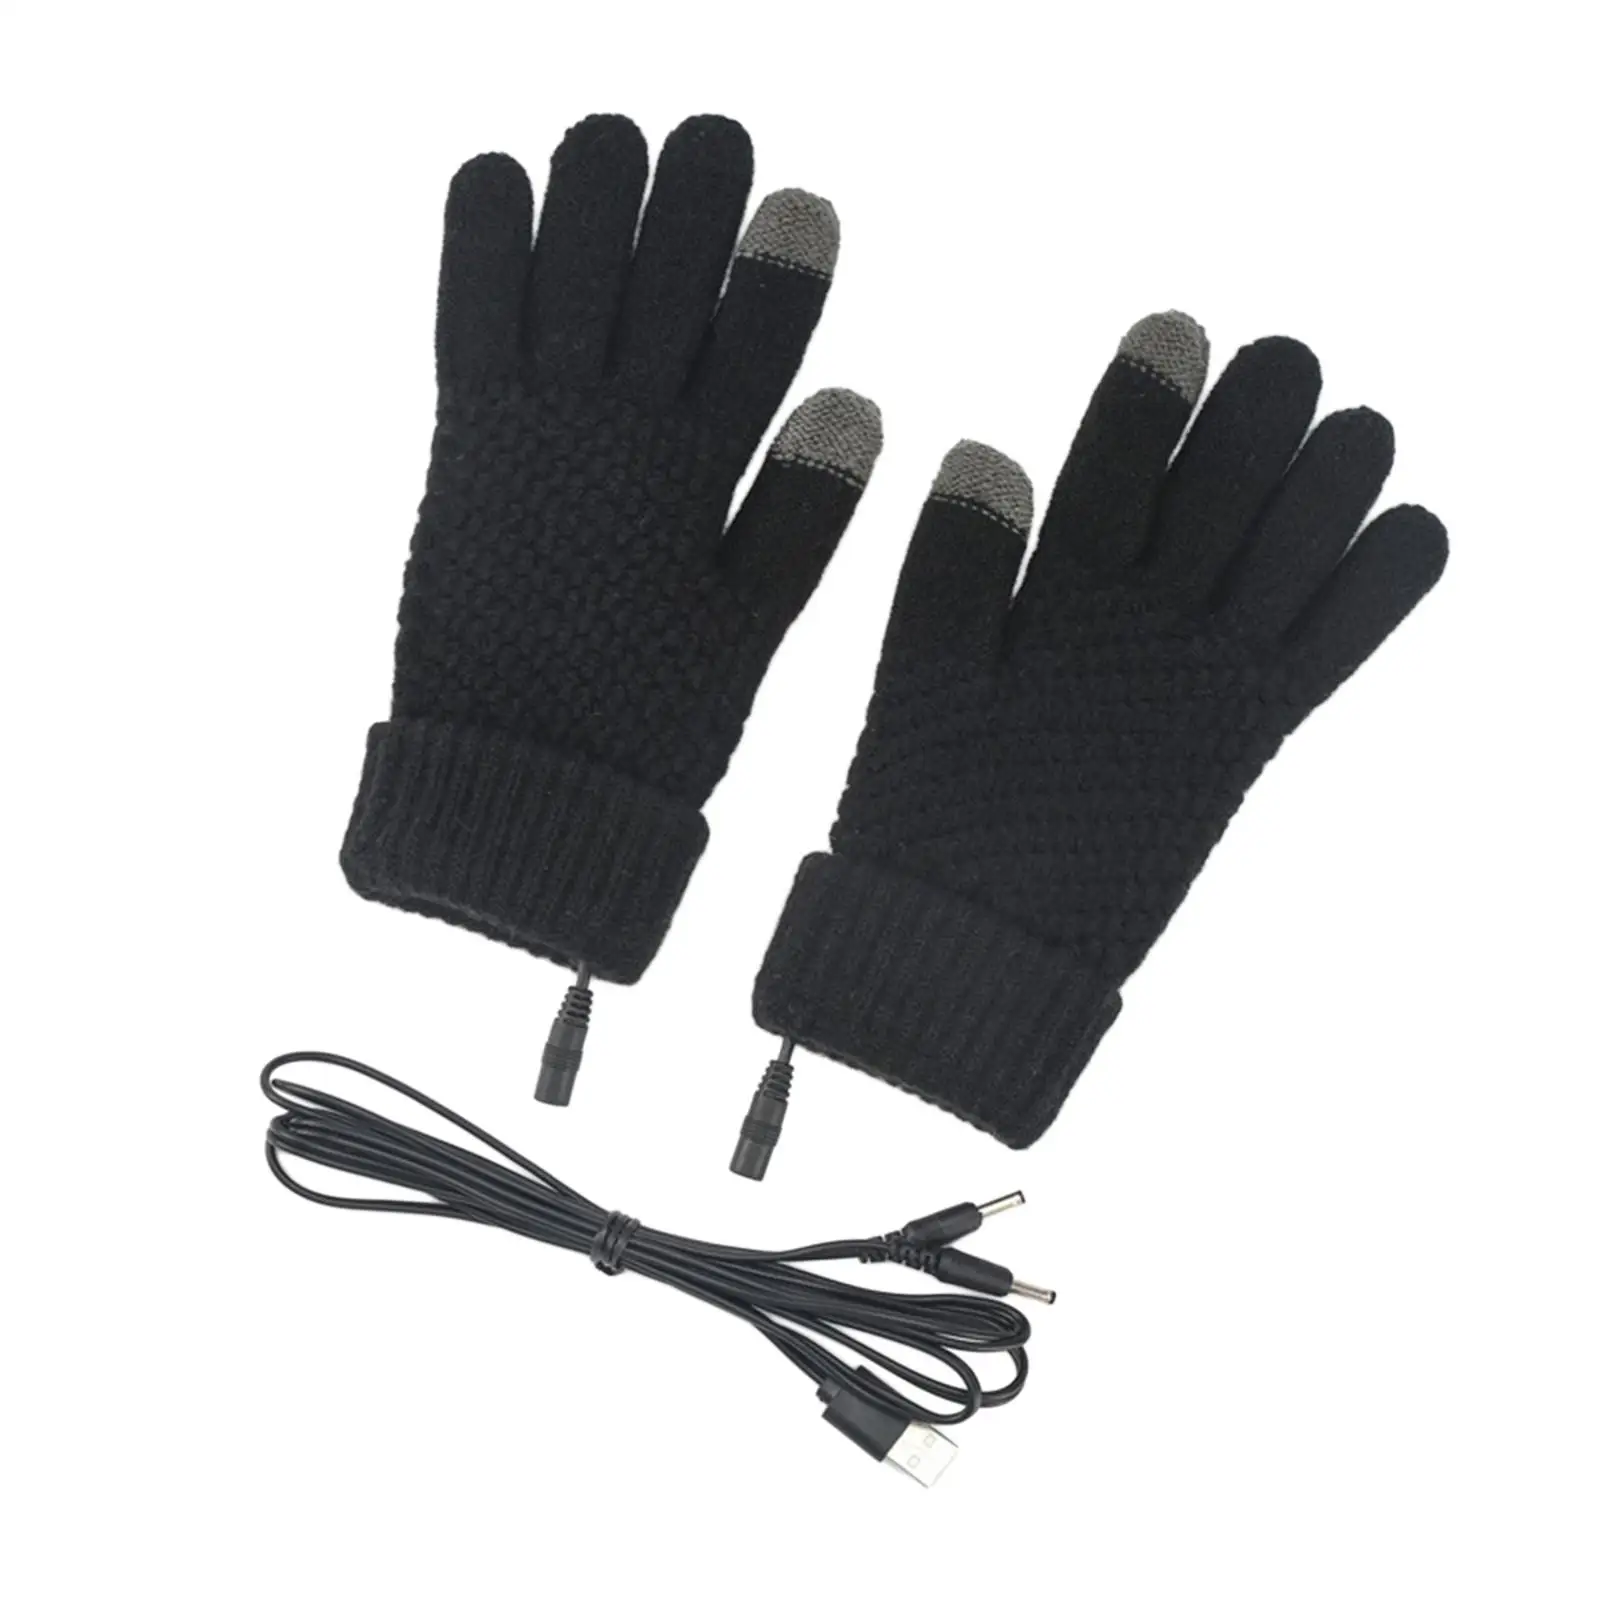 USB Heated Gloves Washable Electric Hands Warmer for Cycling Outdoor Hiking